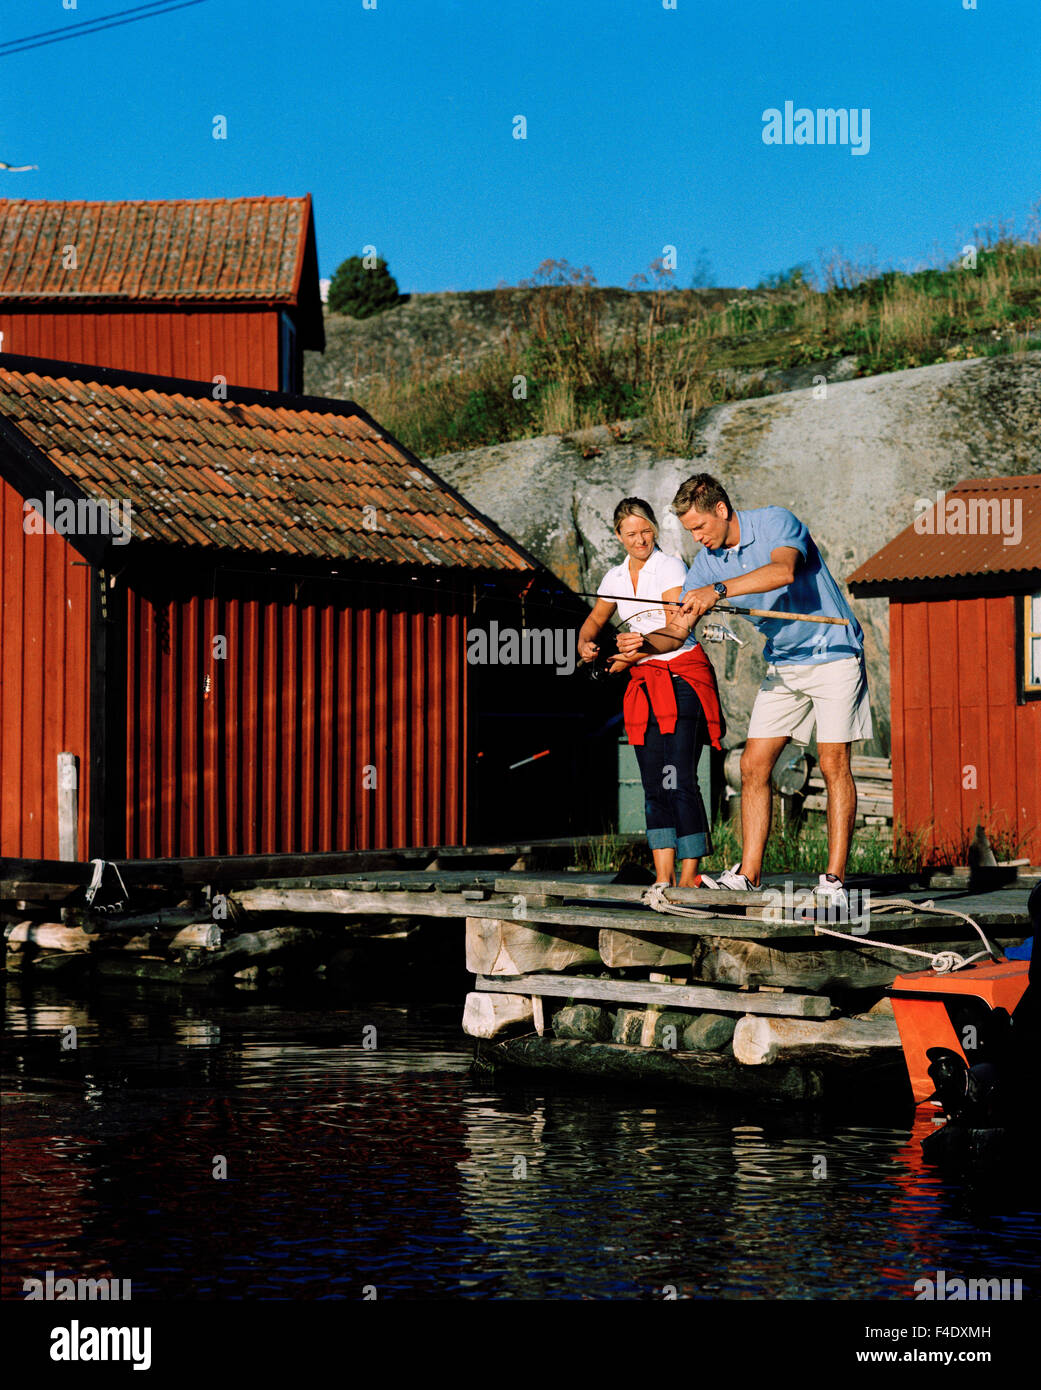 A man and a woman fishing, Harstena, Sweden. Stock Photo